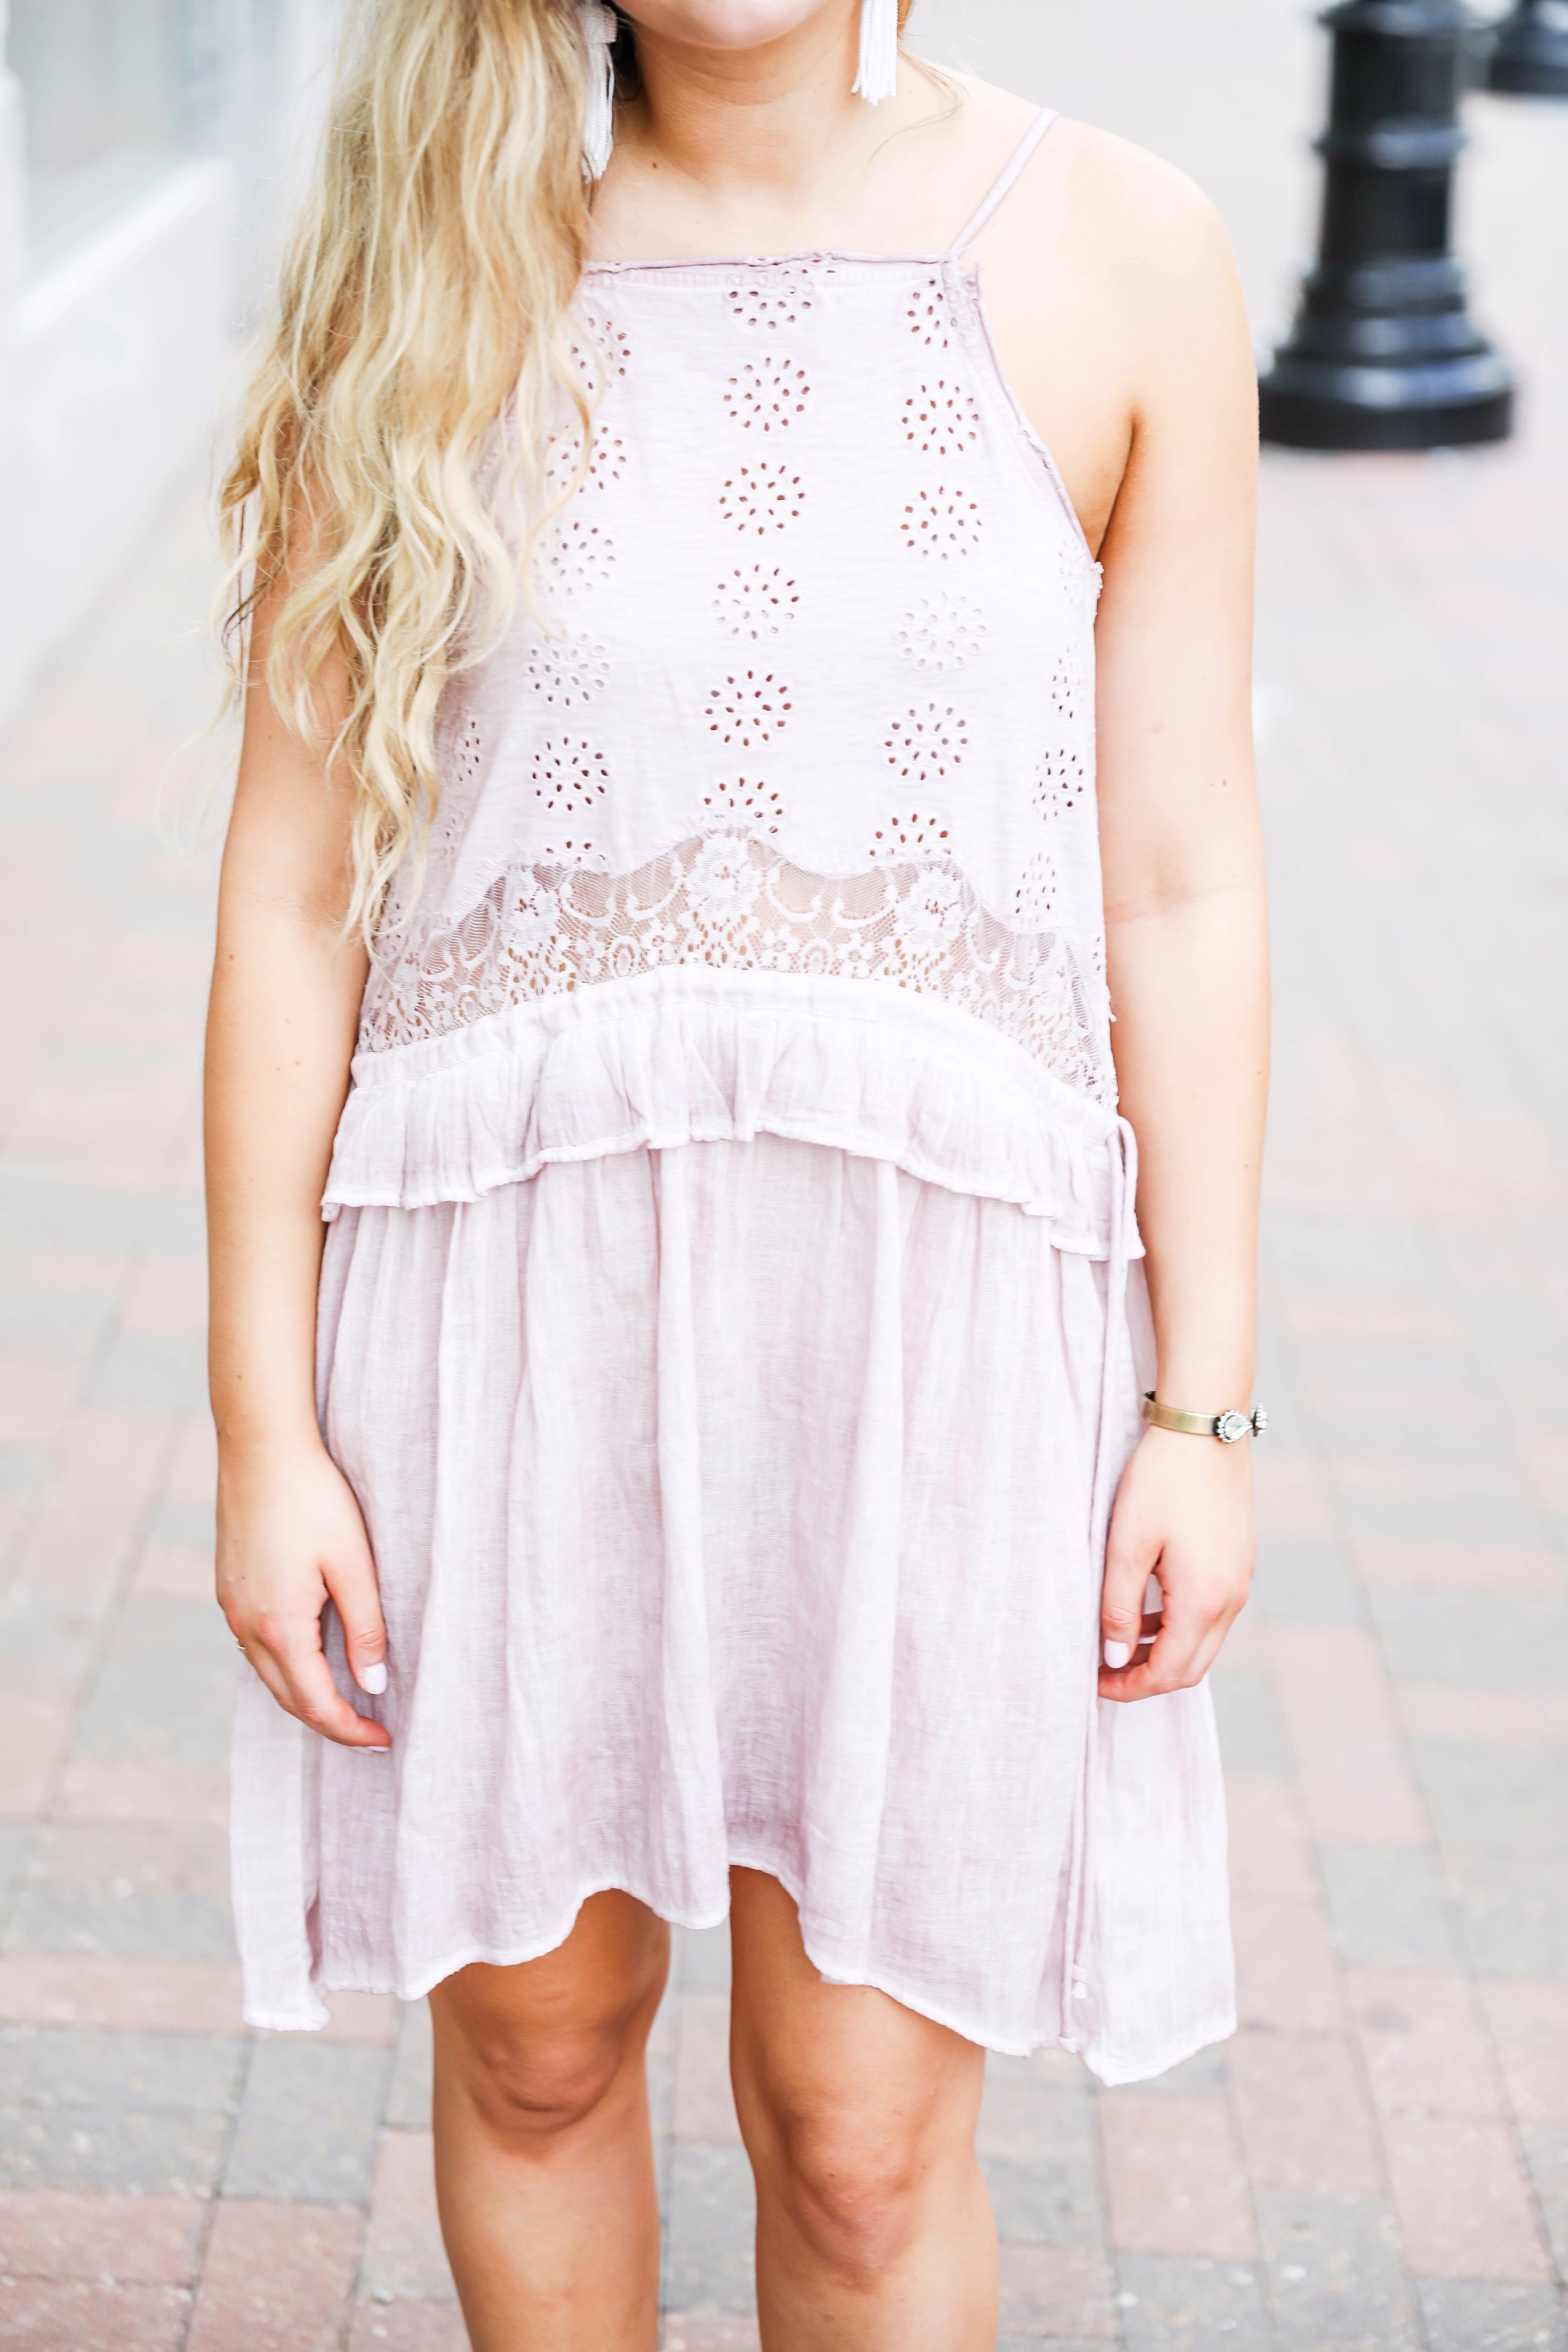 Pretty lavender lace dress paired with booties for fall! The color of this dress is amazing, I can't get over the lace detail around the waste! Outfit by fashion blogger daily dose of charm by lauren lindmark